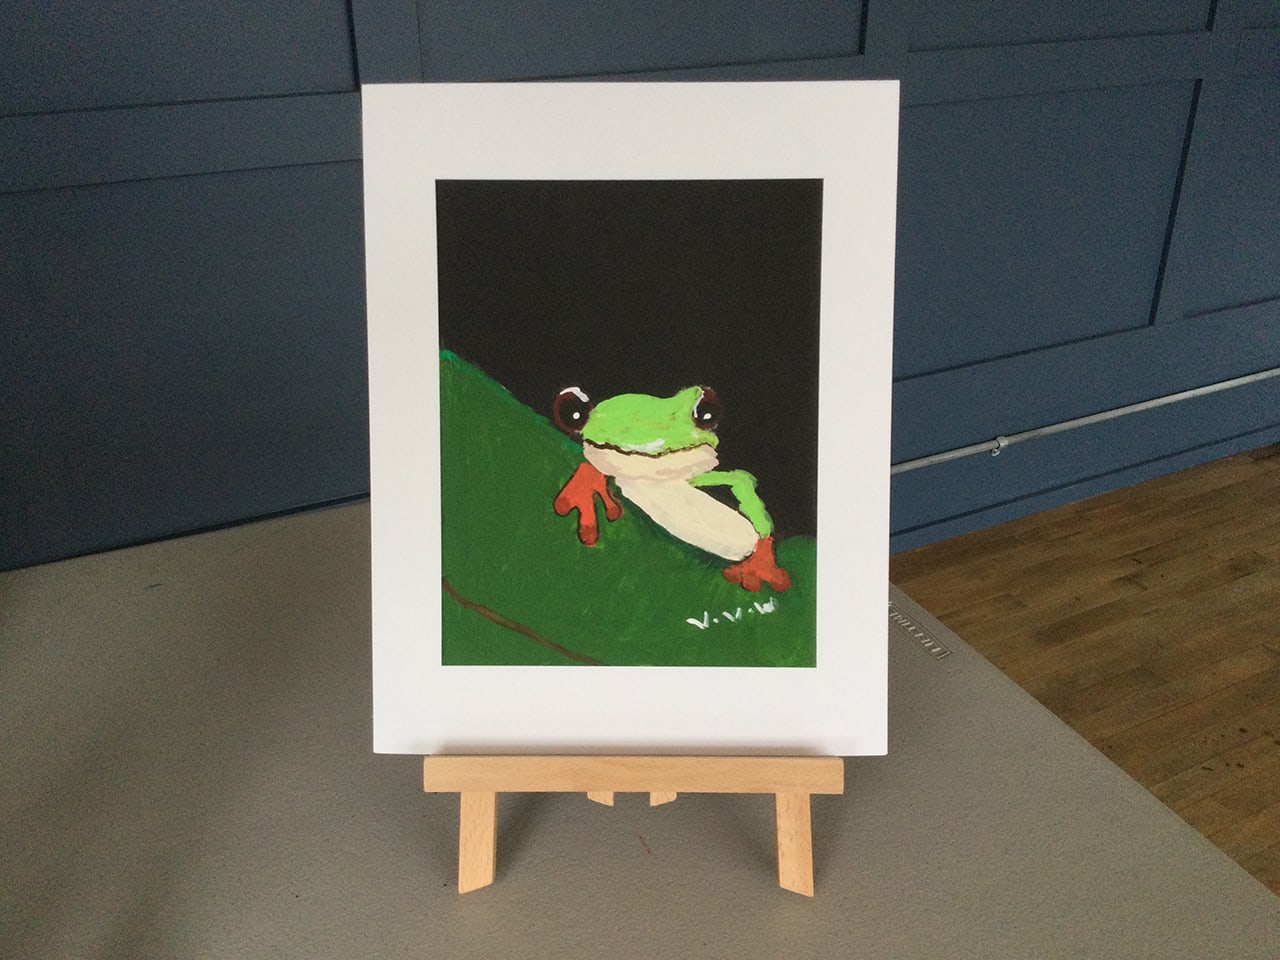 Large Digital Print of a Green Frog lounging on a Green Leaf